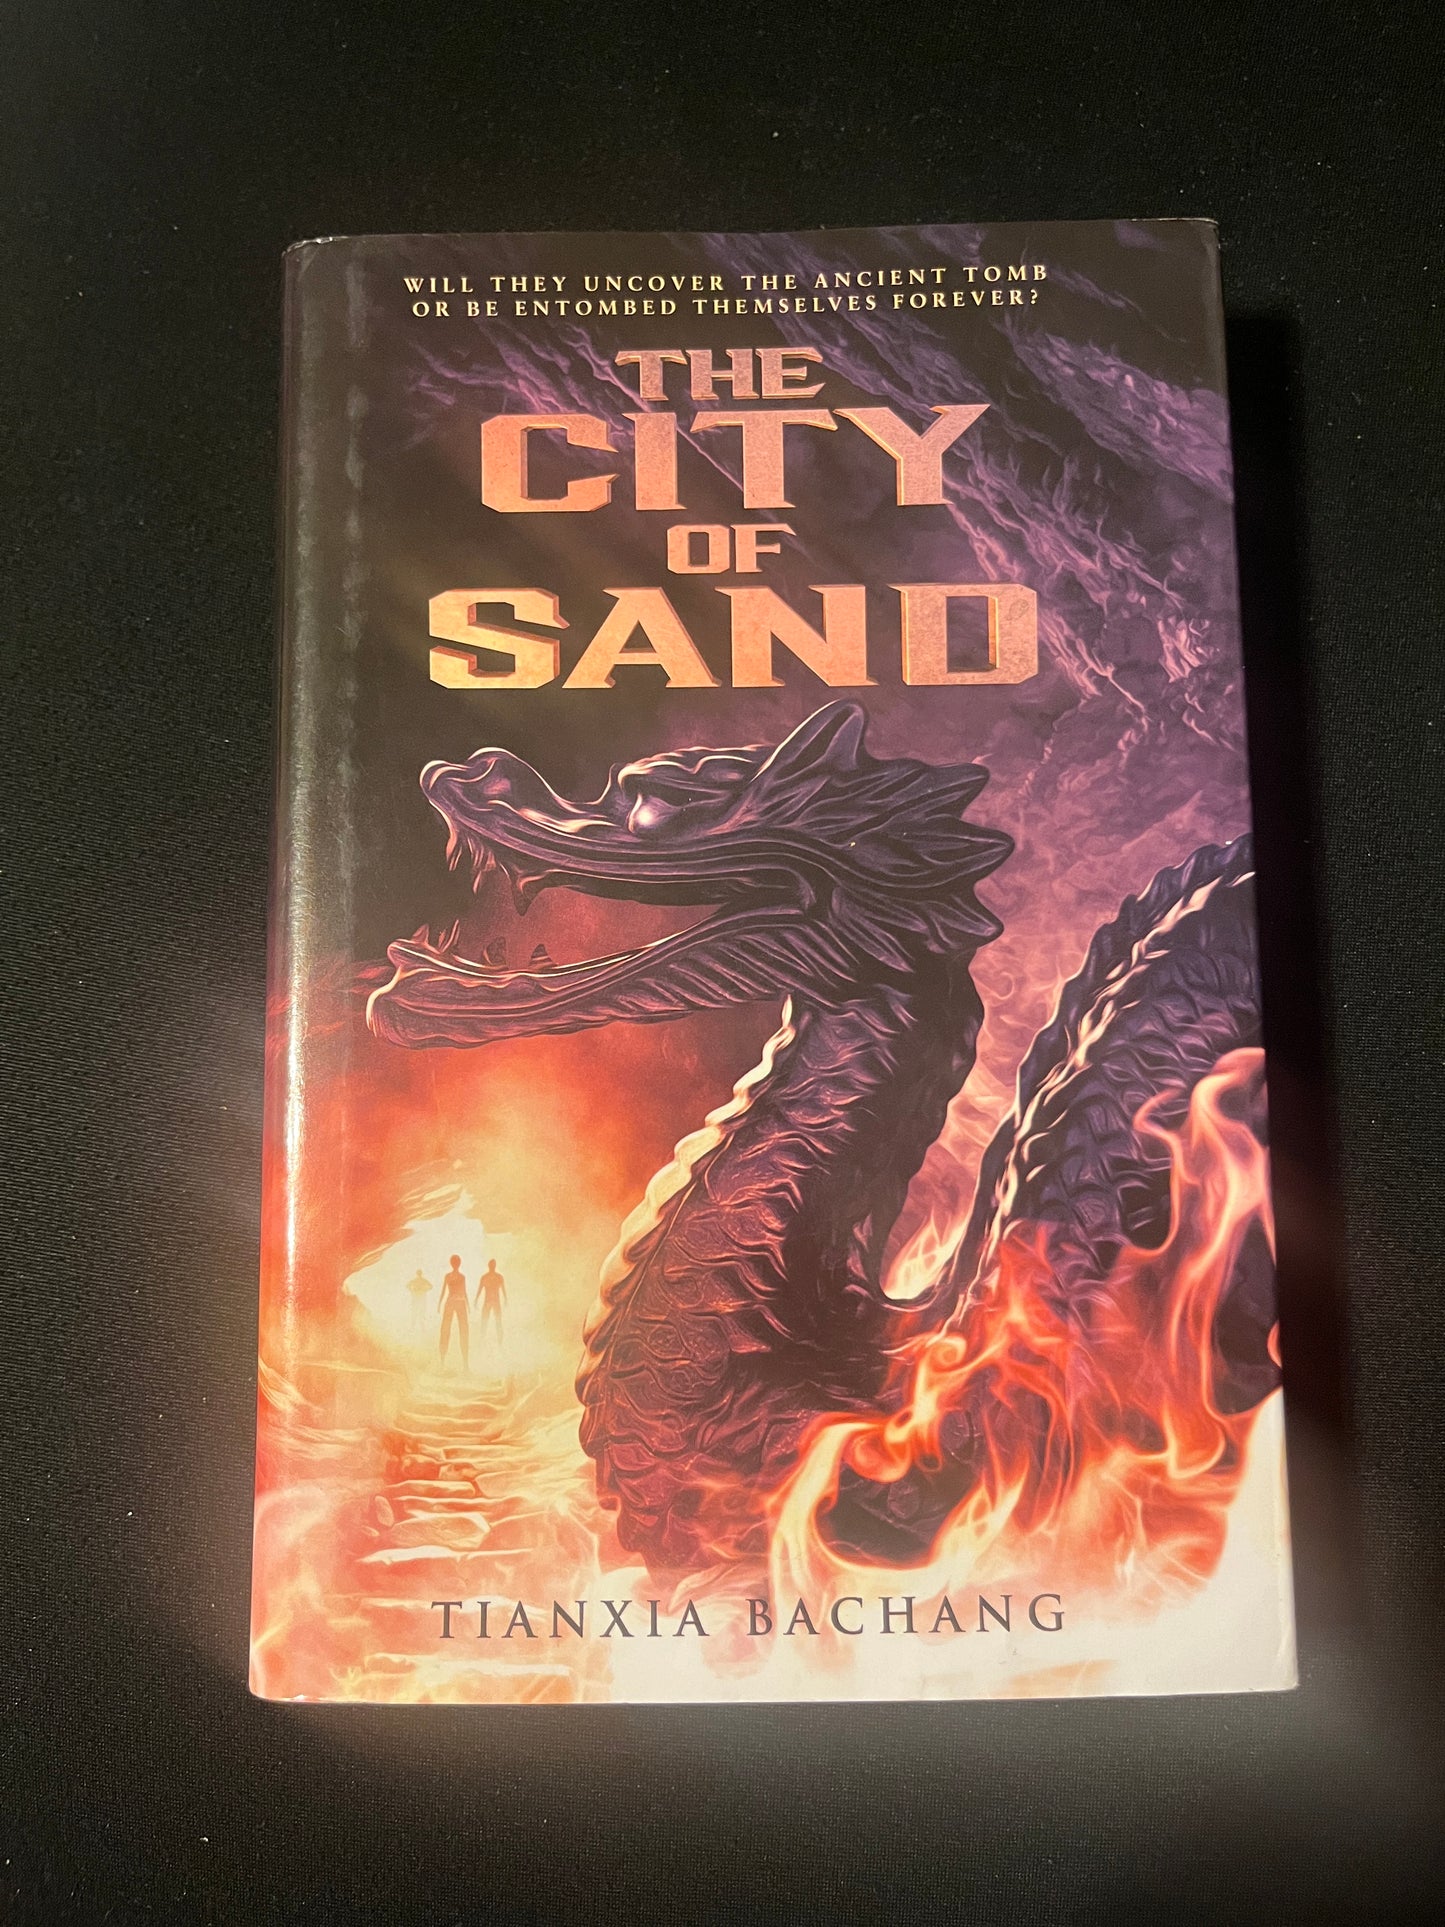 THE CITY OF SAND by Tianxia Bachang